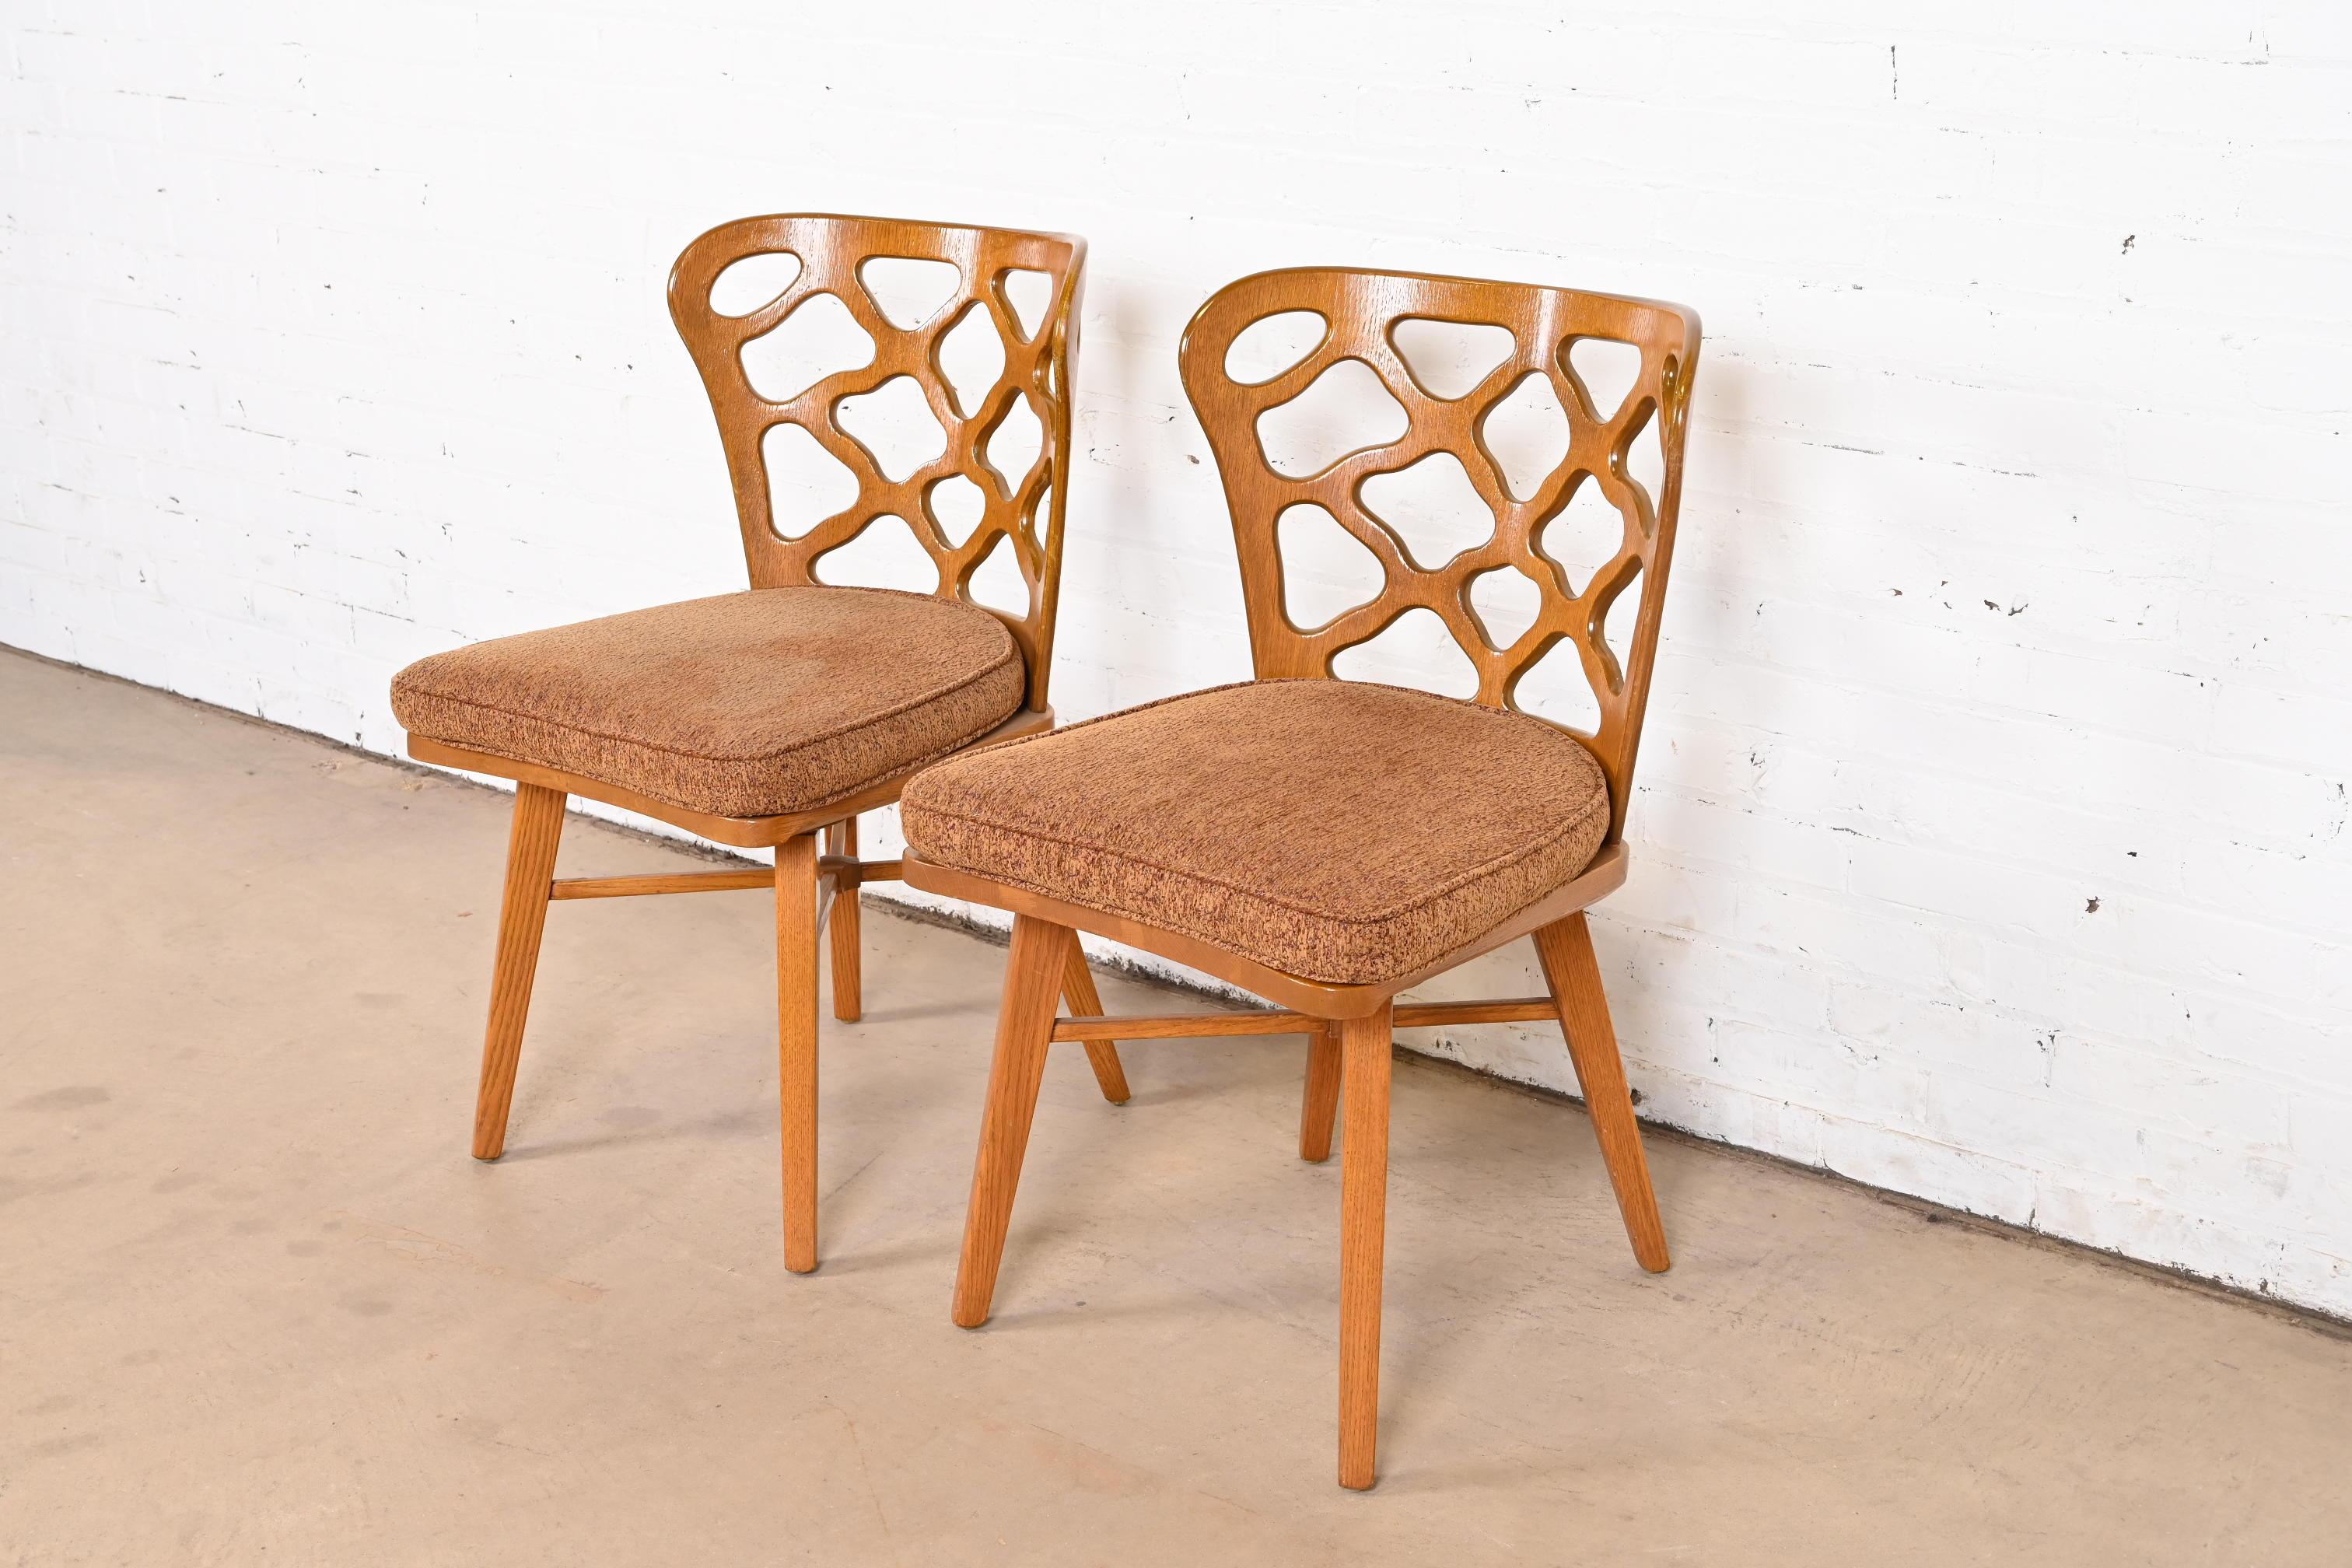 Mid-20th Century Harold Schwartz for Romweber Mid-Century Modern Sculpted Oak Side Chairs, Pair For Sale